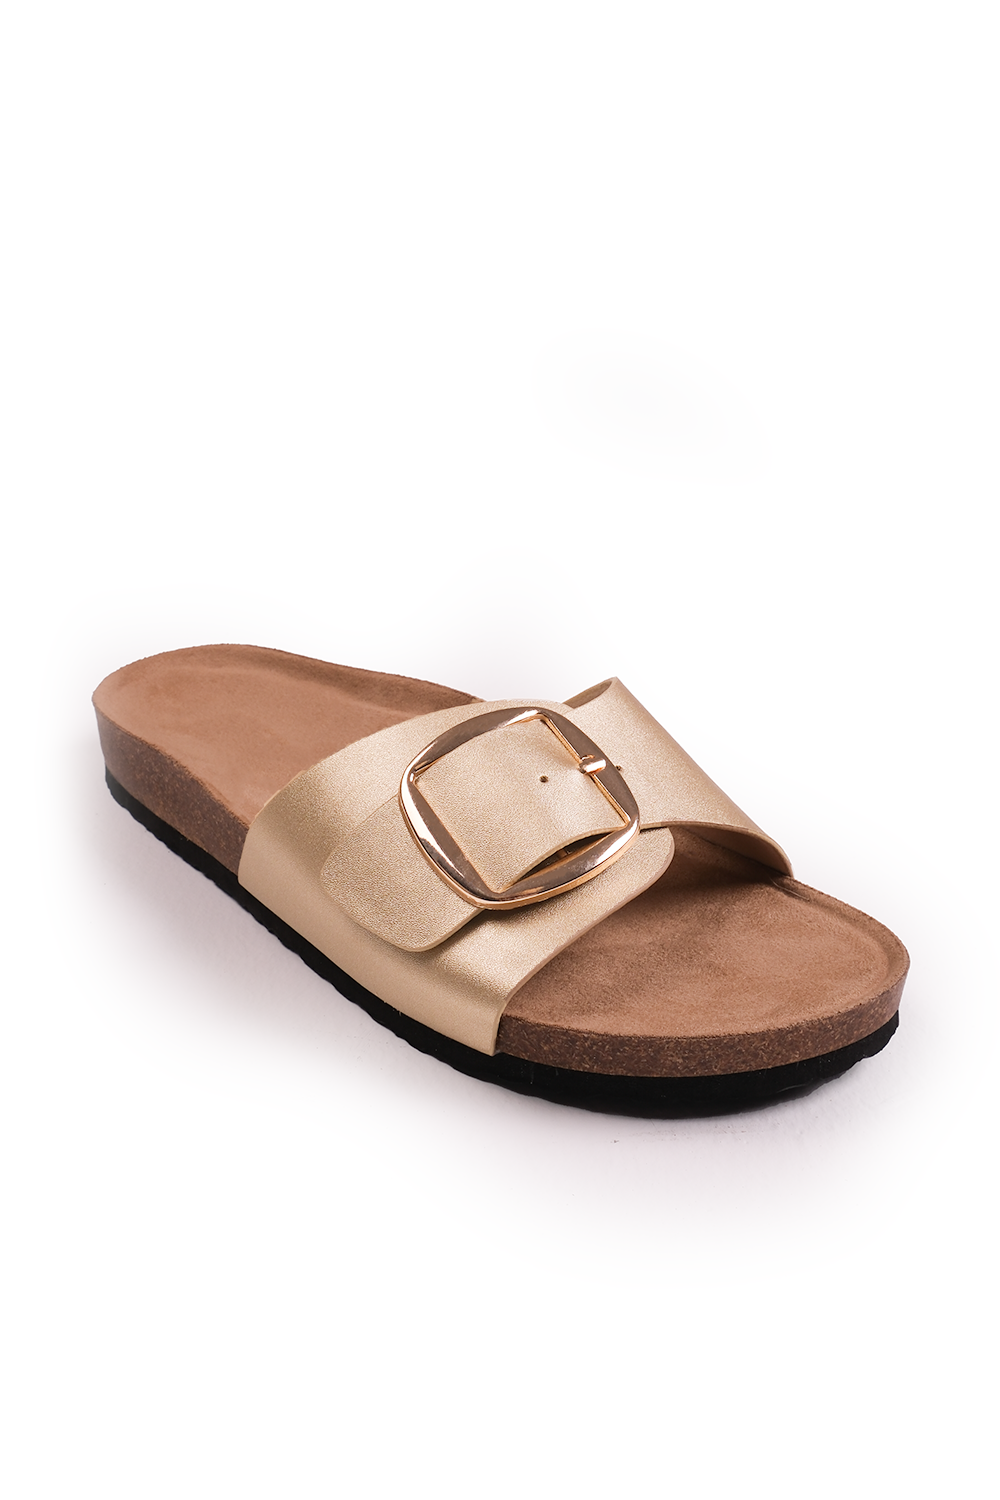 SEQUOIA FLAT SINGLE STRAP SANDALS WITH BUCKLE DETAIL IN GOLD MATT FAUX LEATHER